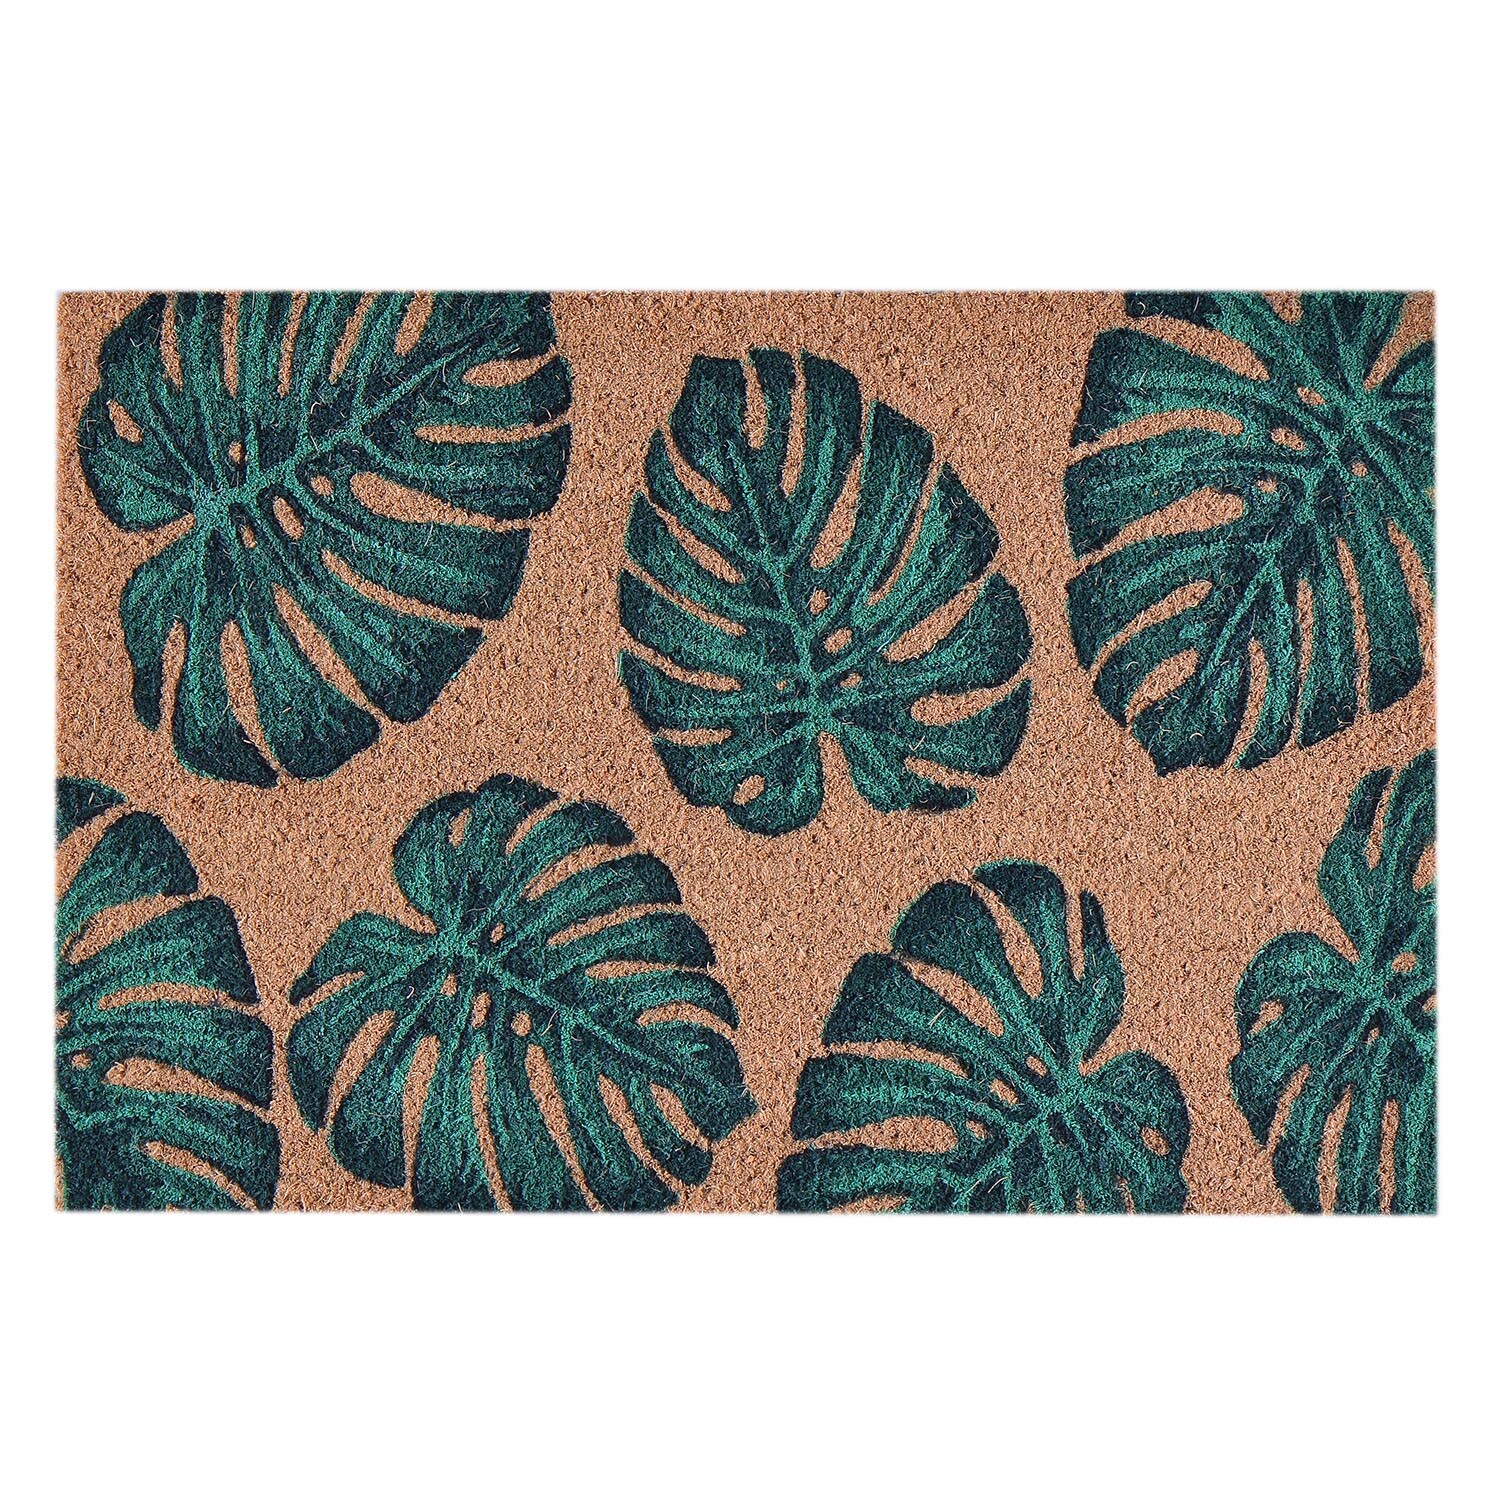 Single Botanical or Bee PVC Backed Doormat in Assorted styles Image 1